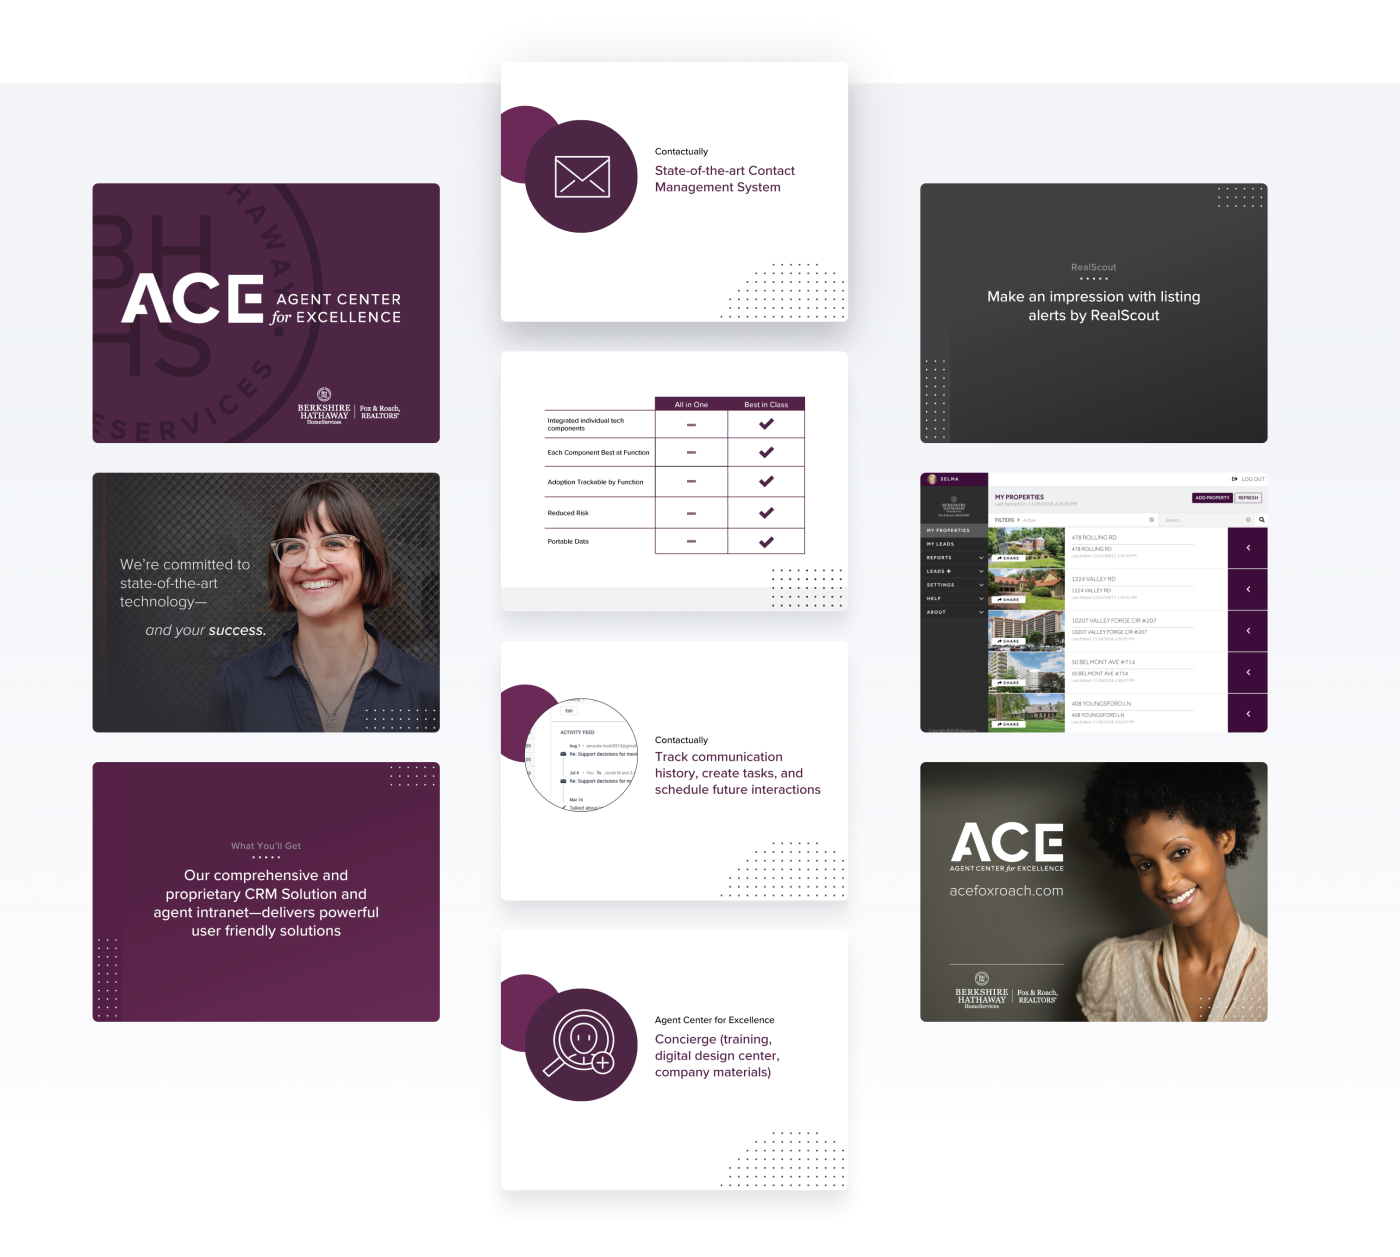 slides featuring the ACE logo and happy people